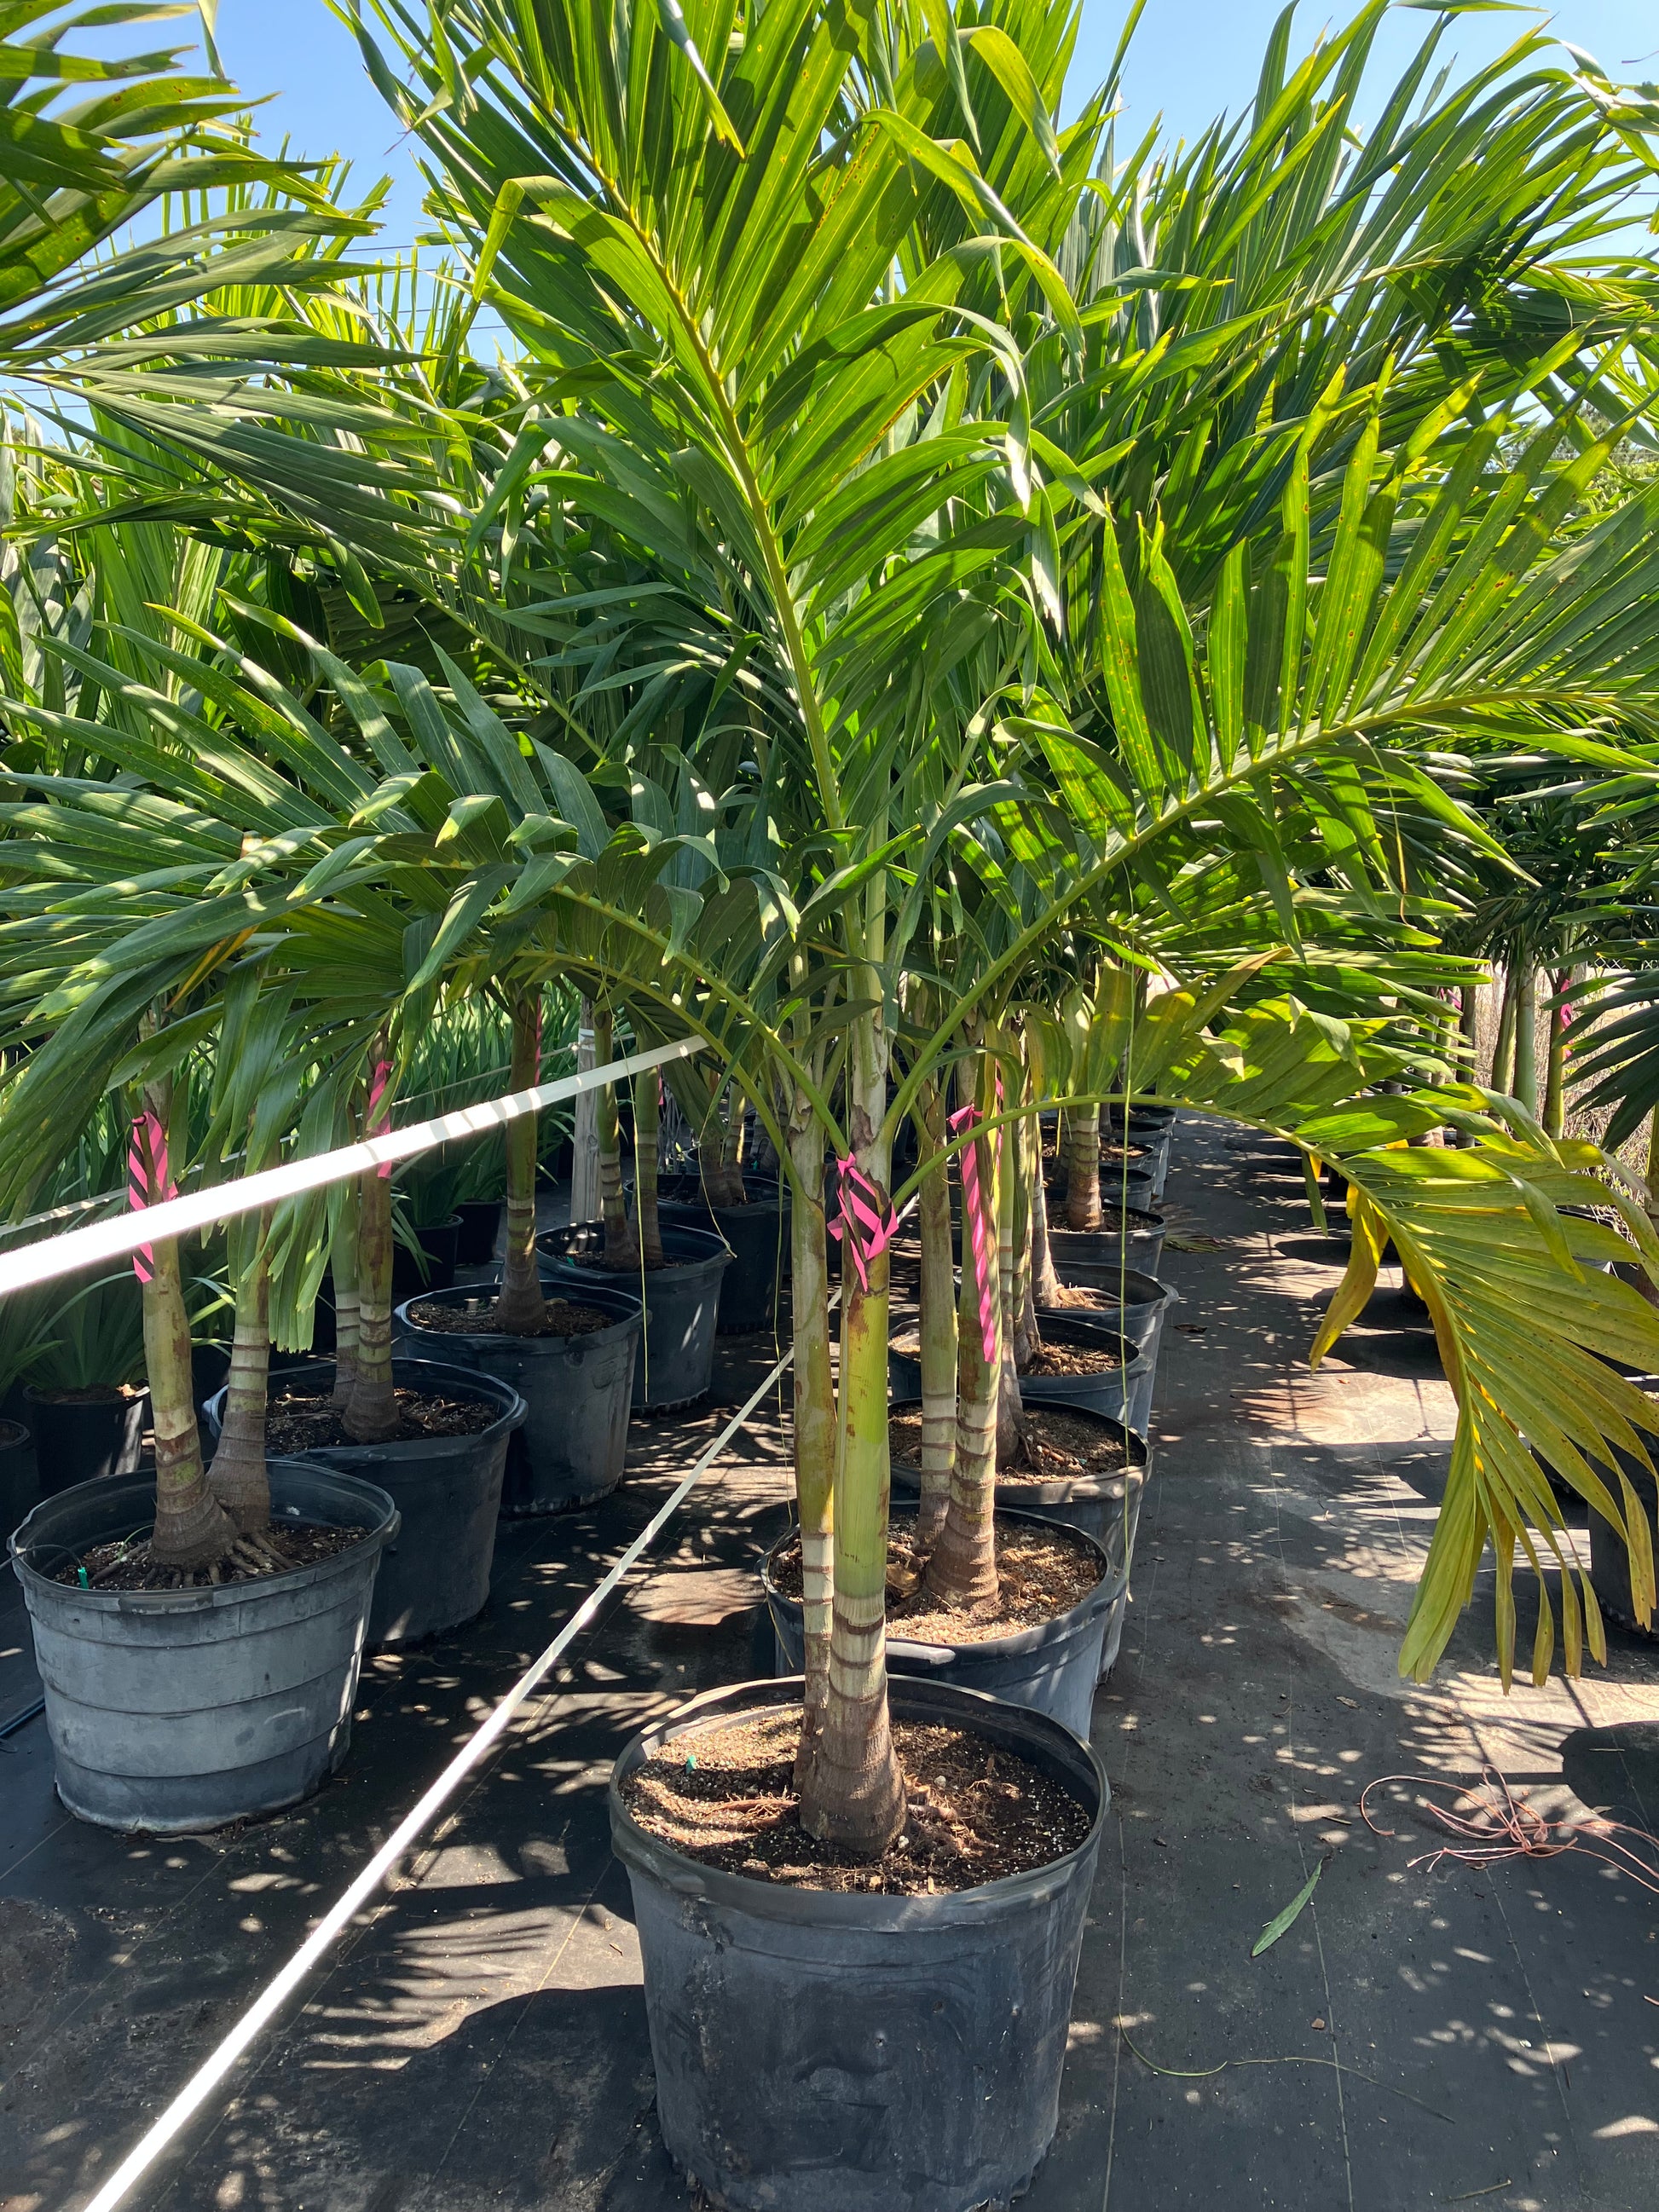 30 Gallon Adonidia How to choose the correct size Adonidia or Christmas Palm Tree, height, width, and number of trunks are important to your landscaping project